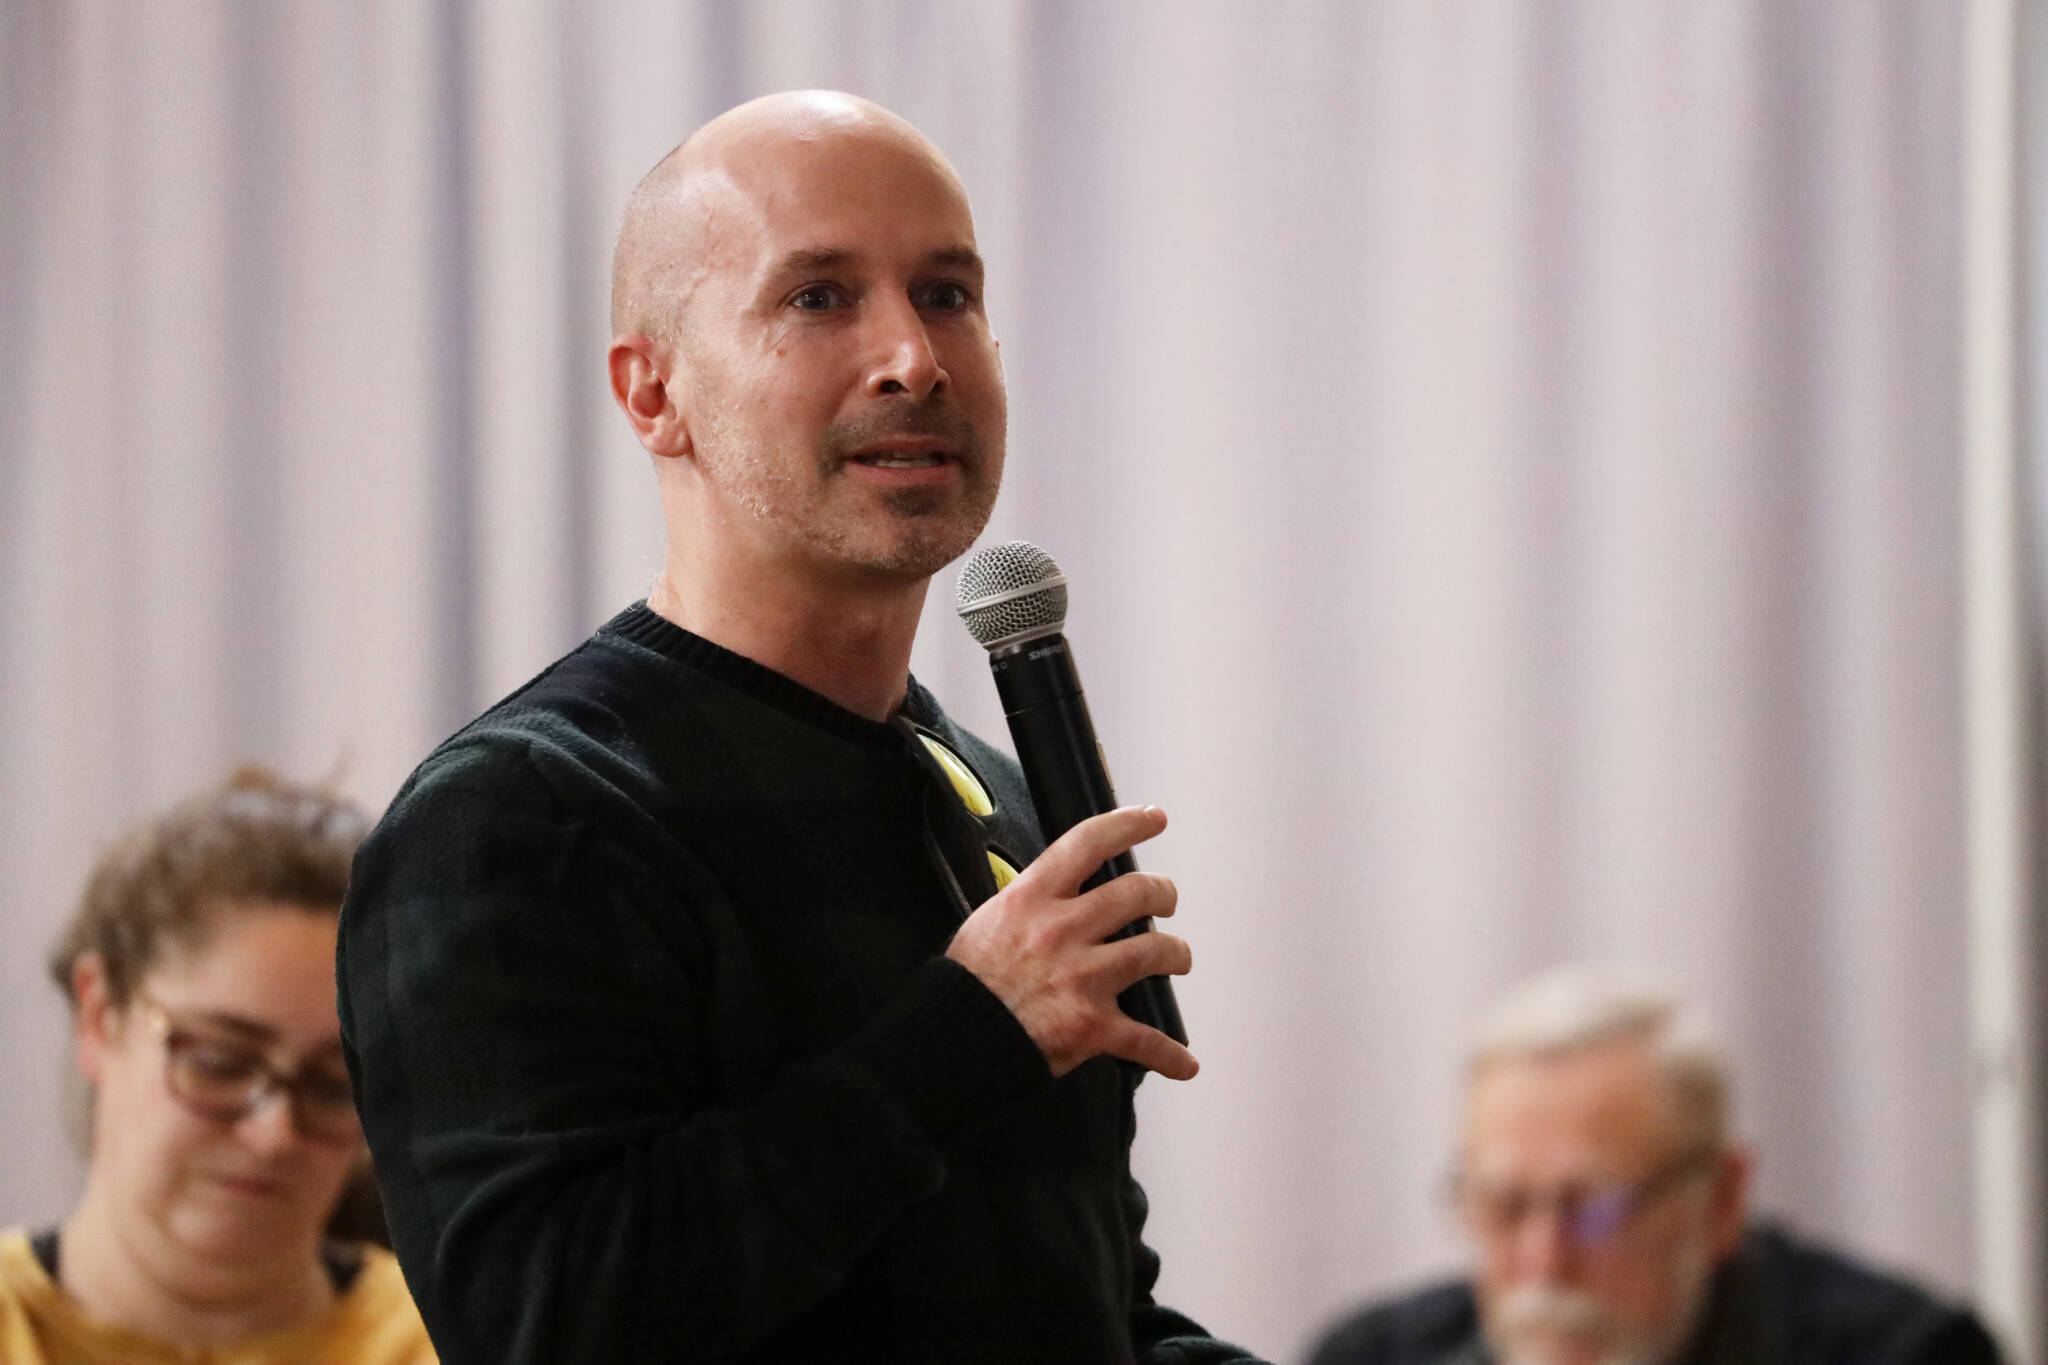 Areawide Assembly candidate Paul Kelly speaks to the crowd gathered at a public meeting to discuss the new design concepts for the Telephone Hill redevelopment project that were presented Wednesday evening at the Juneau Arts and Culture Center. (Clarise Larson / Juneau Empire)